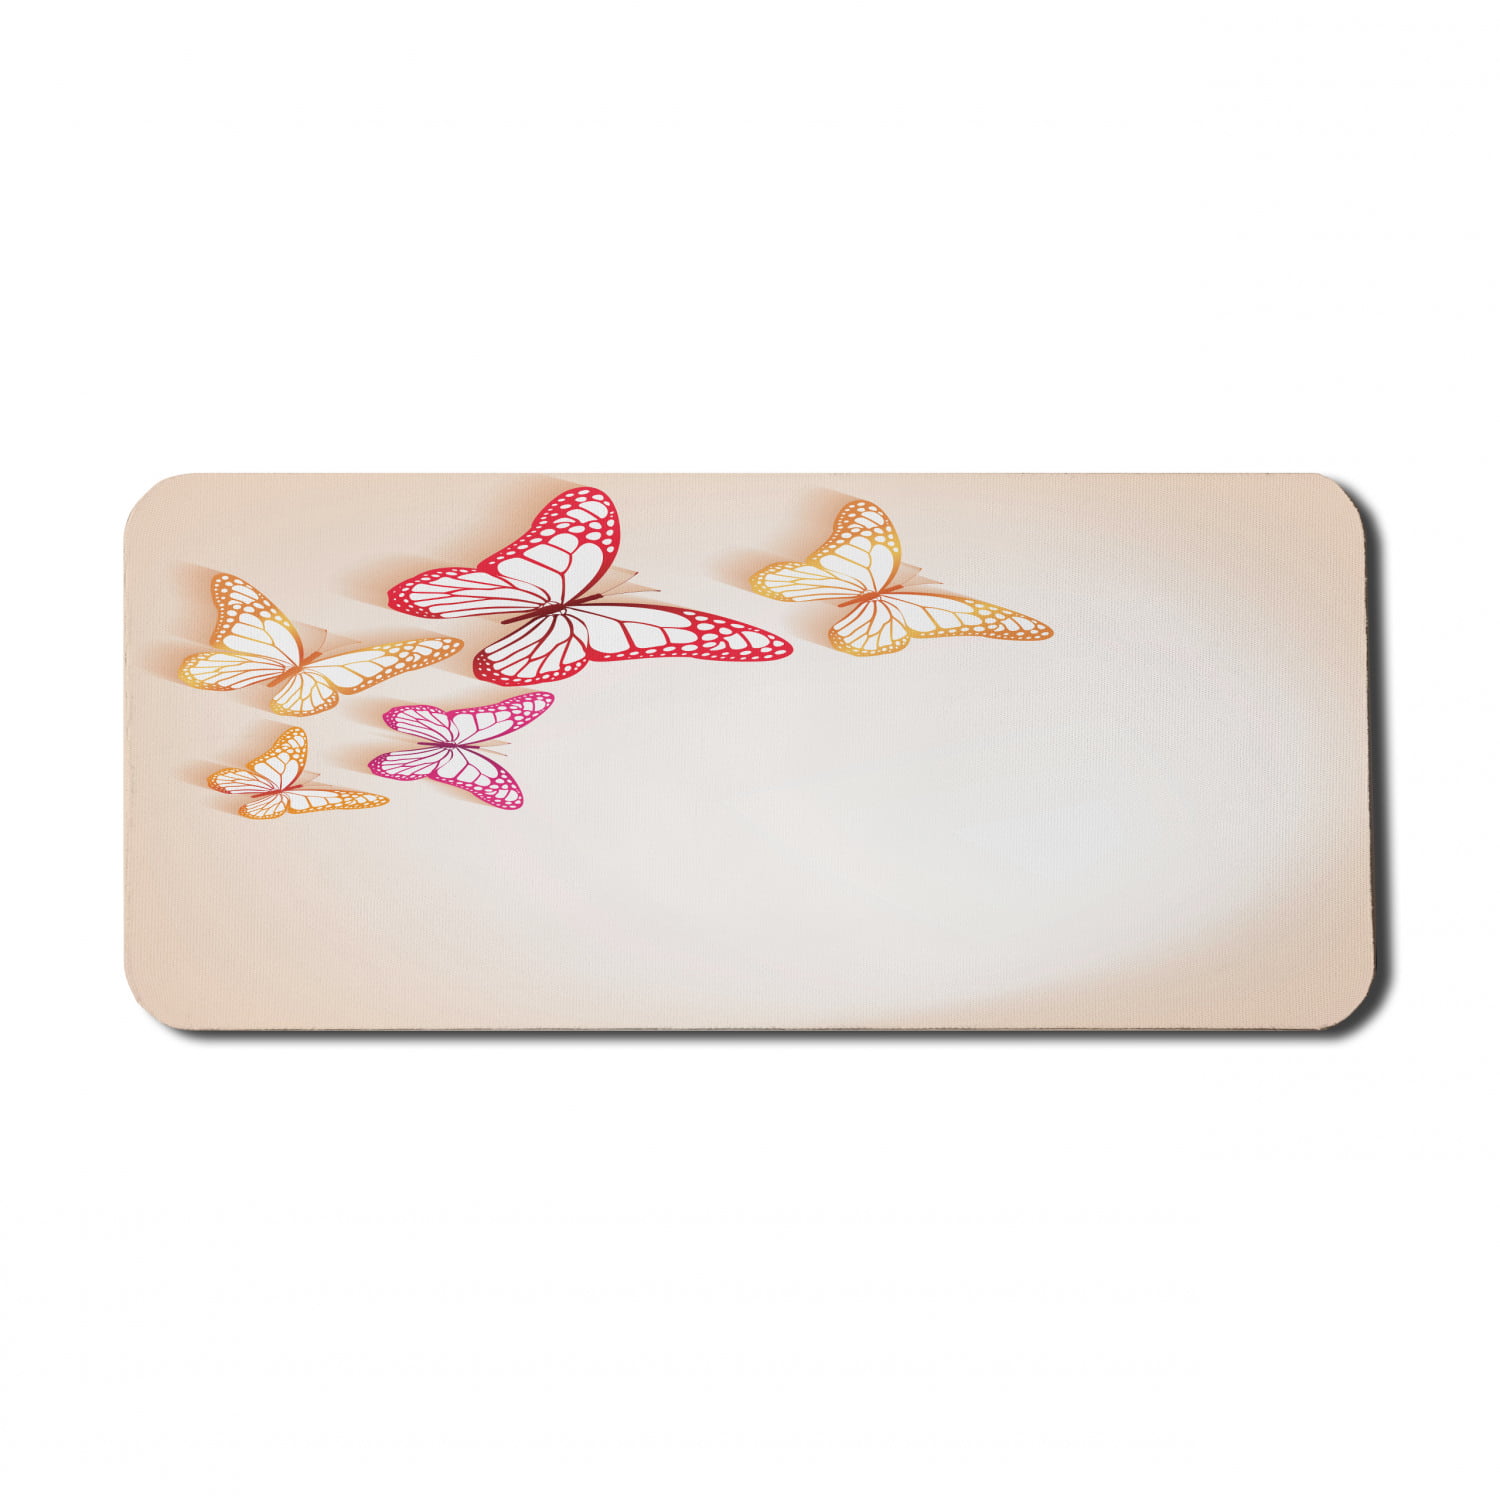 Colorful Butterflies Computer Mouse Pad